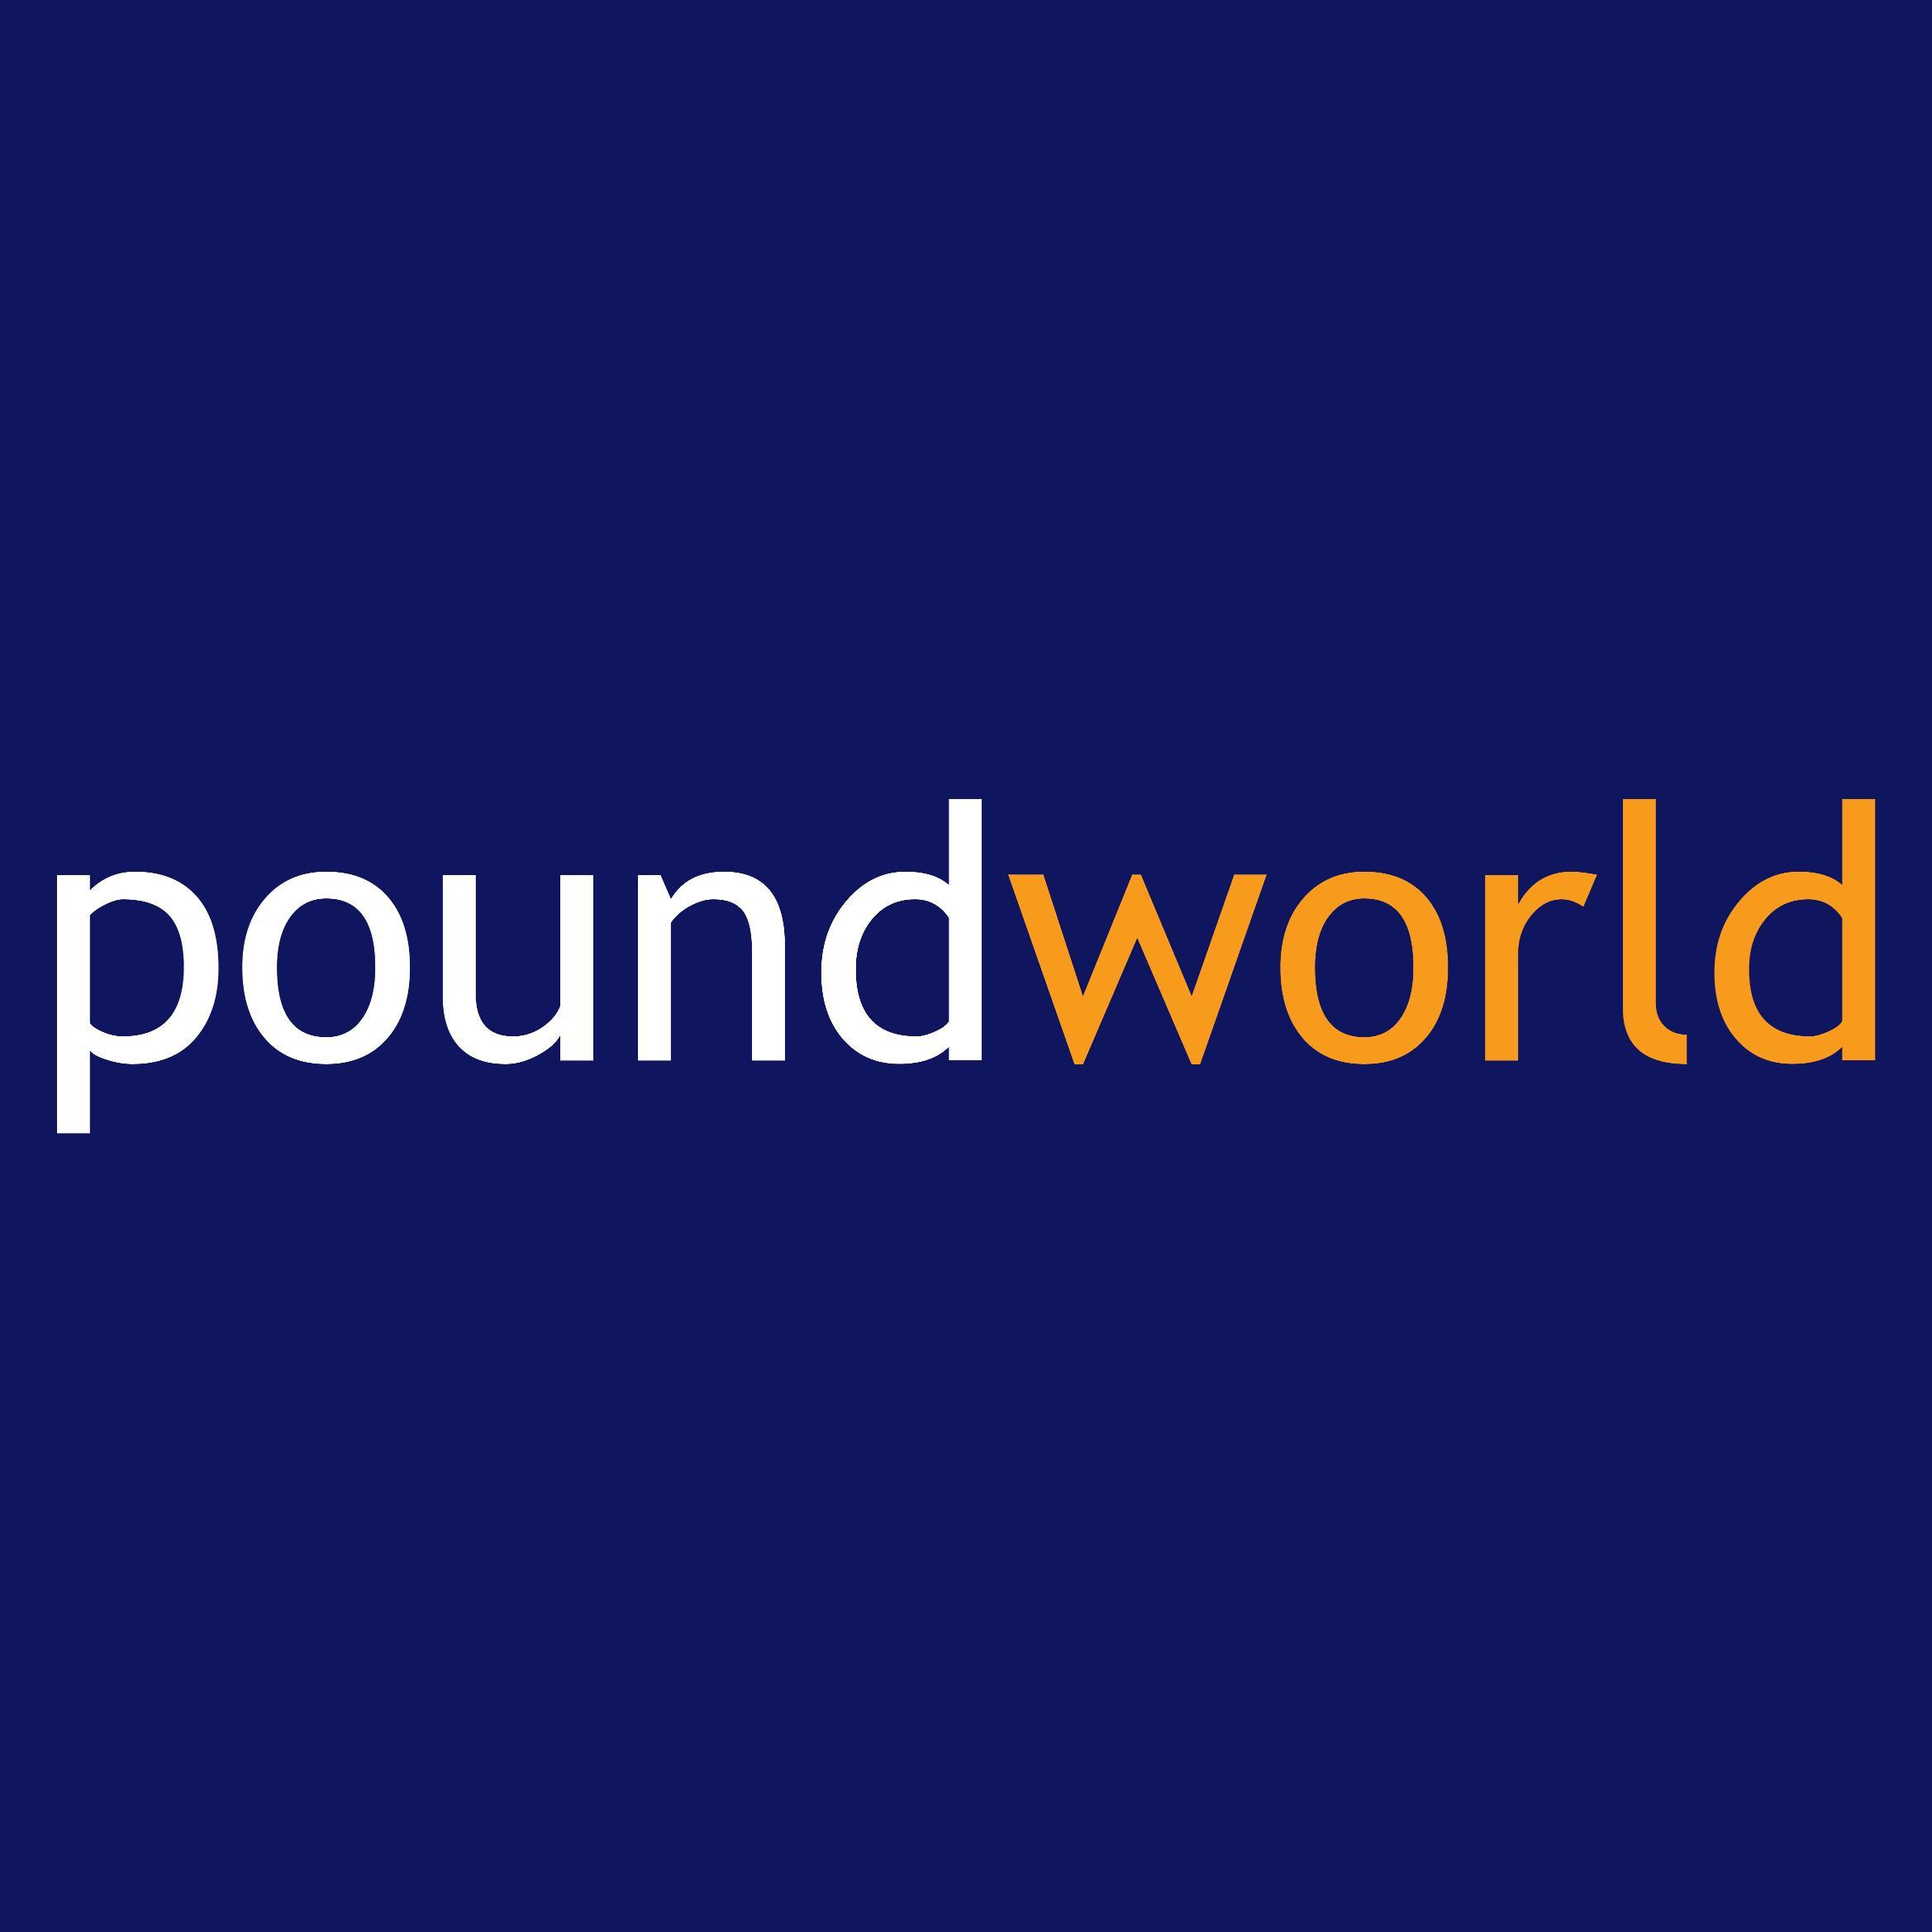 Official account for Poundworld. One of the leading value variety retailers, with over 350 stores nationwide. Join us on Facebook & Instagram too.